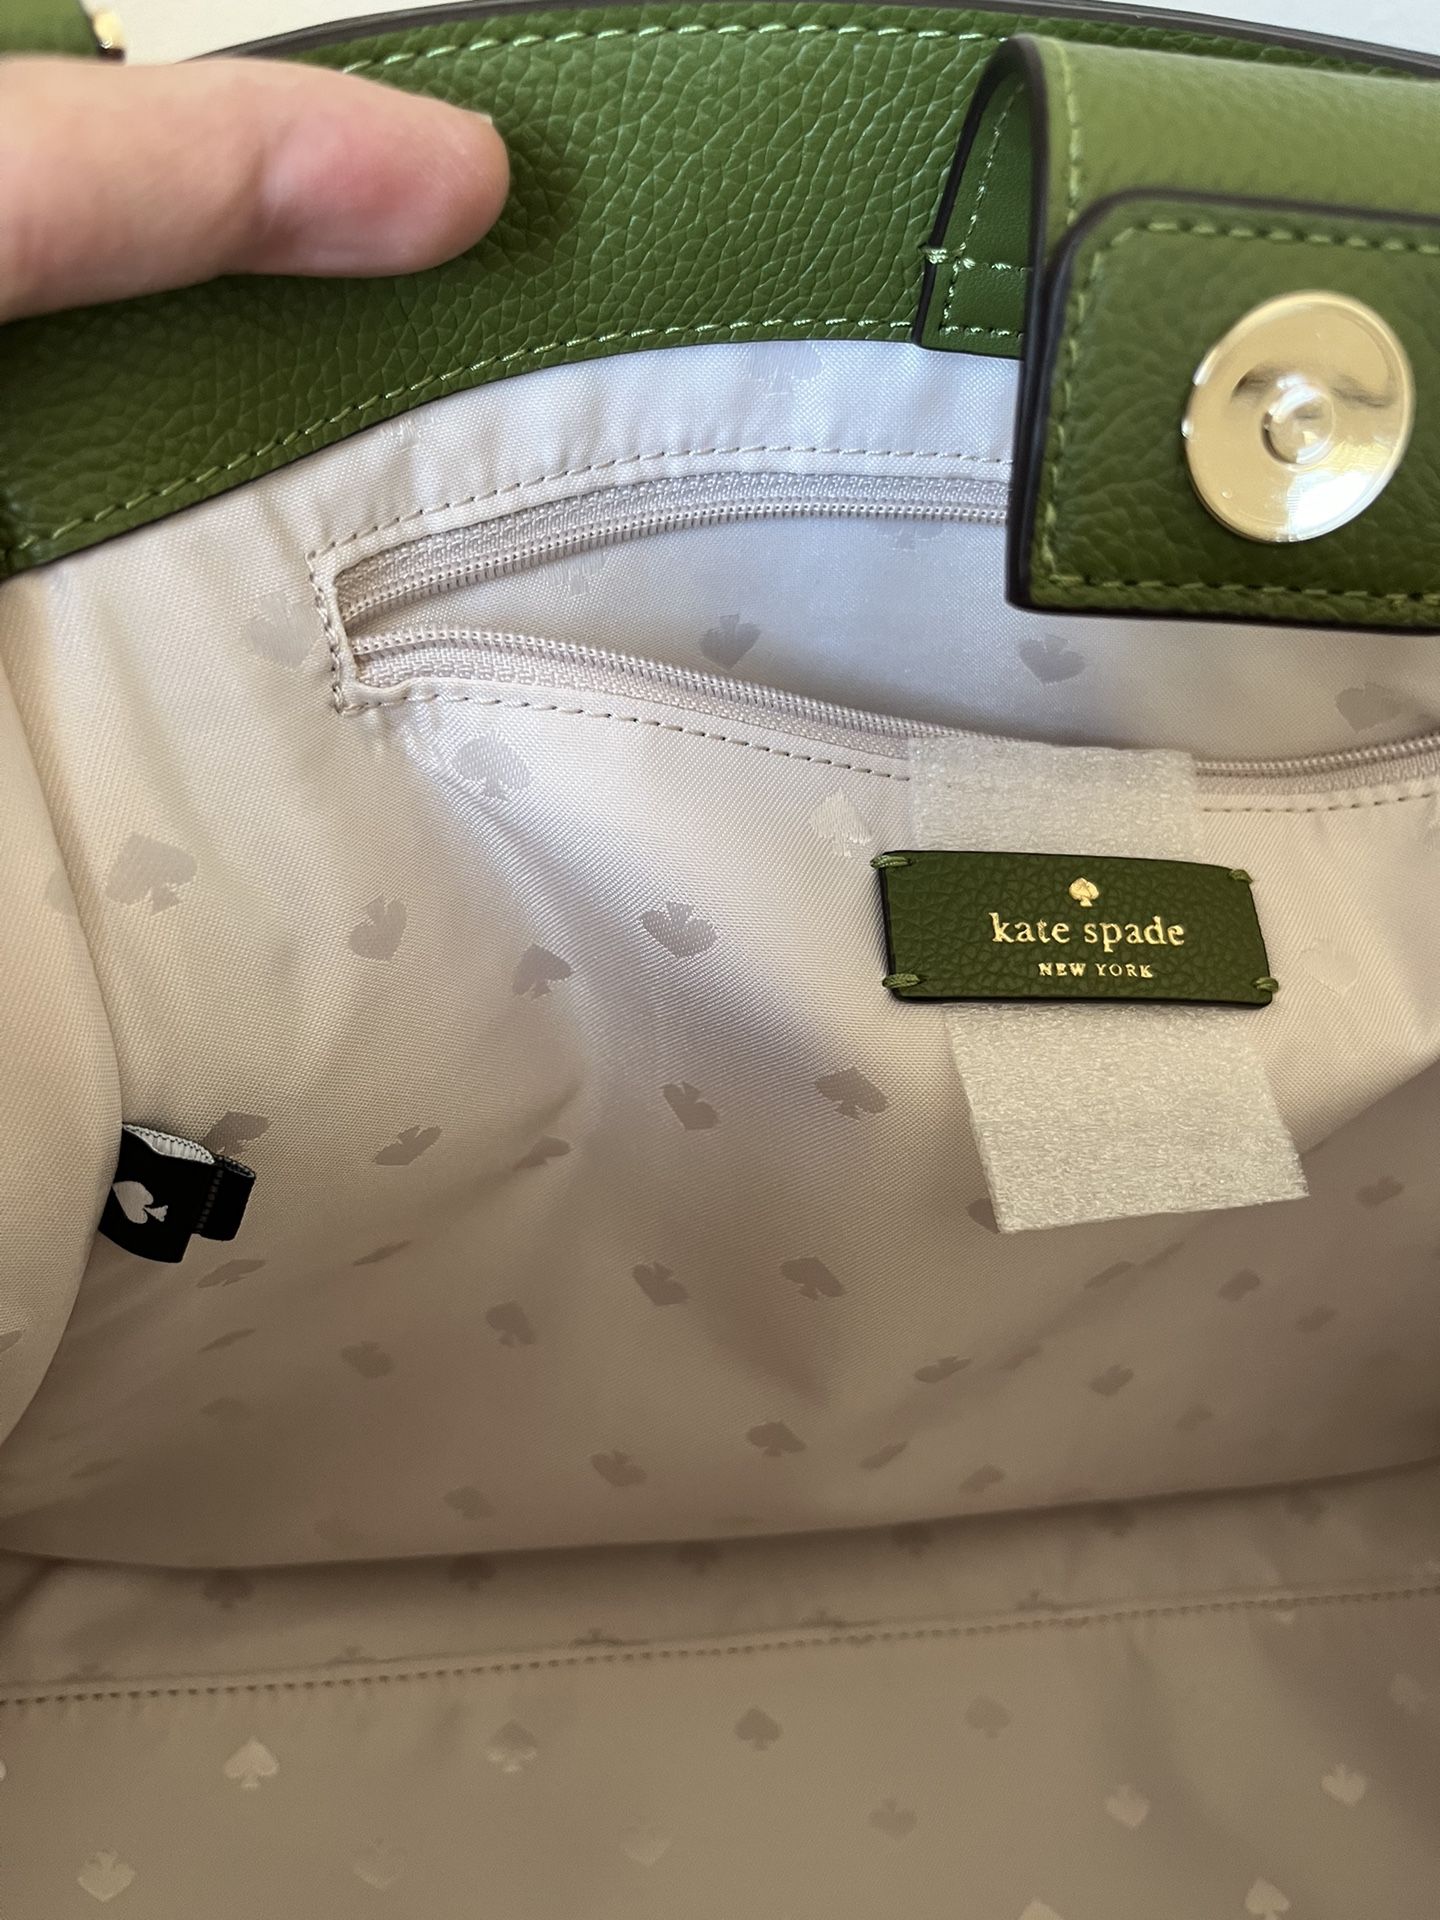 Kate Spade Leila Large Flap Backpack for Sale in Orland Park, IL - OfferUp